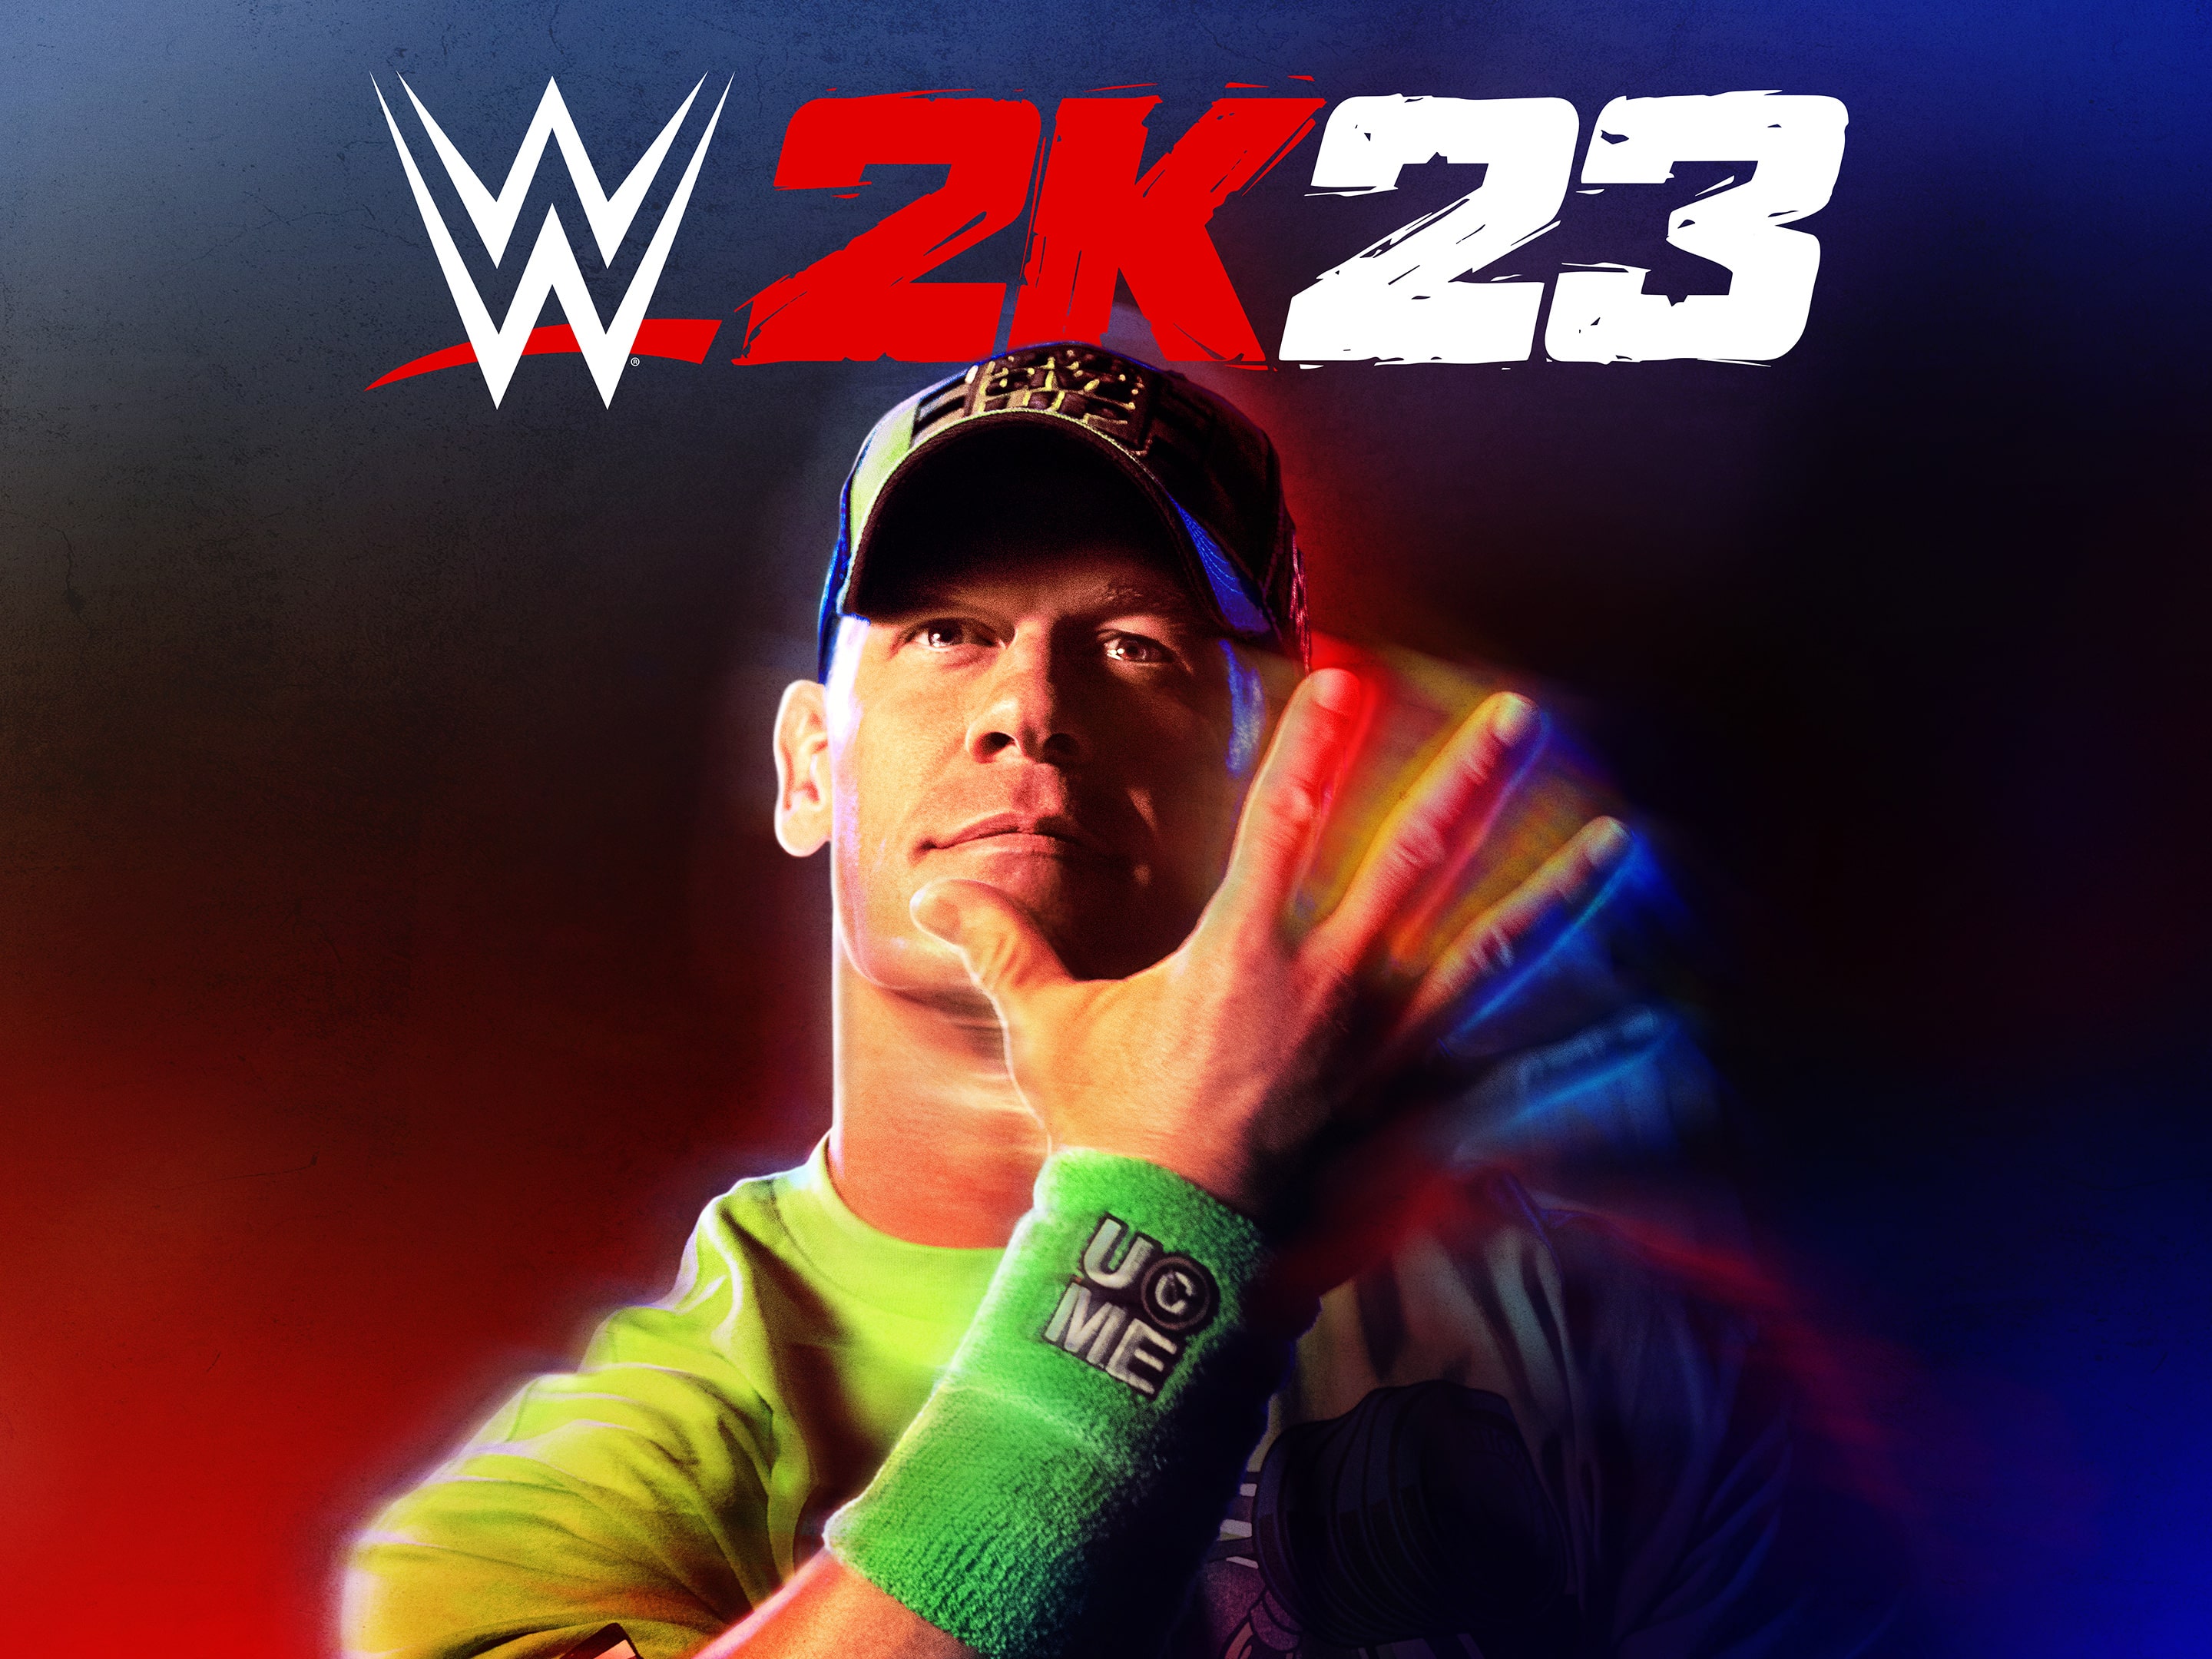 Wwe ps5. WWE 2k23. WWE на Xbox 2017. WWE 2k24 Cross-Gen Digital Edition. WWE 2k24 ps4.